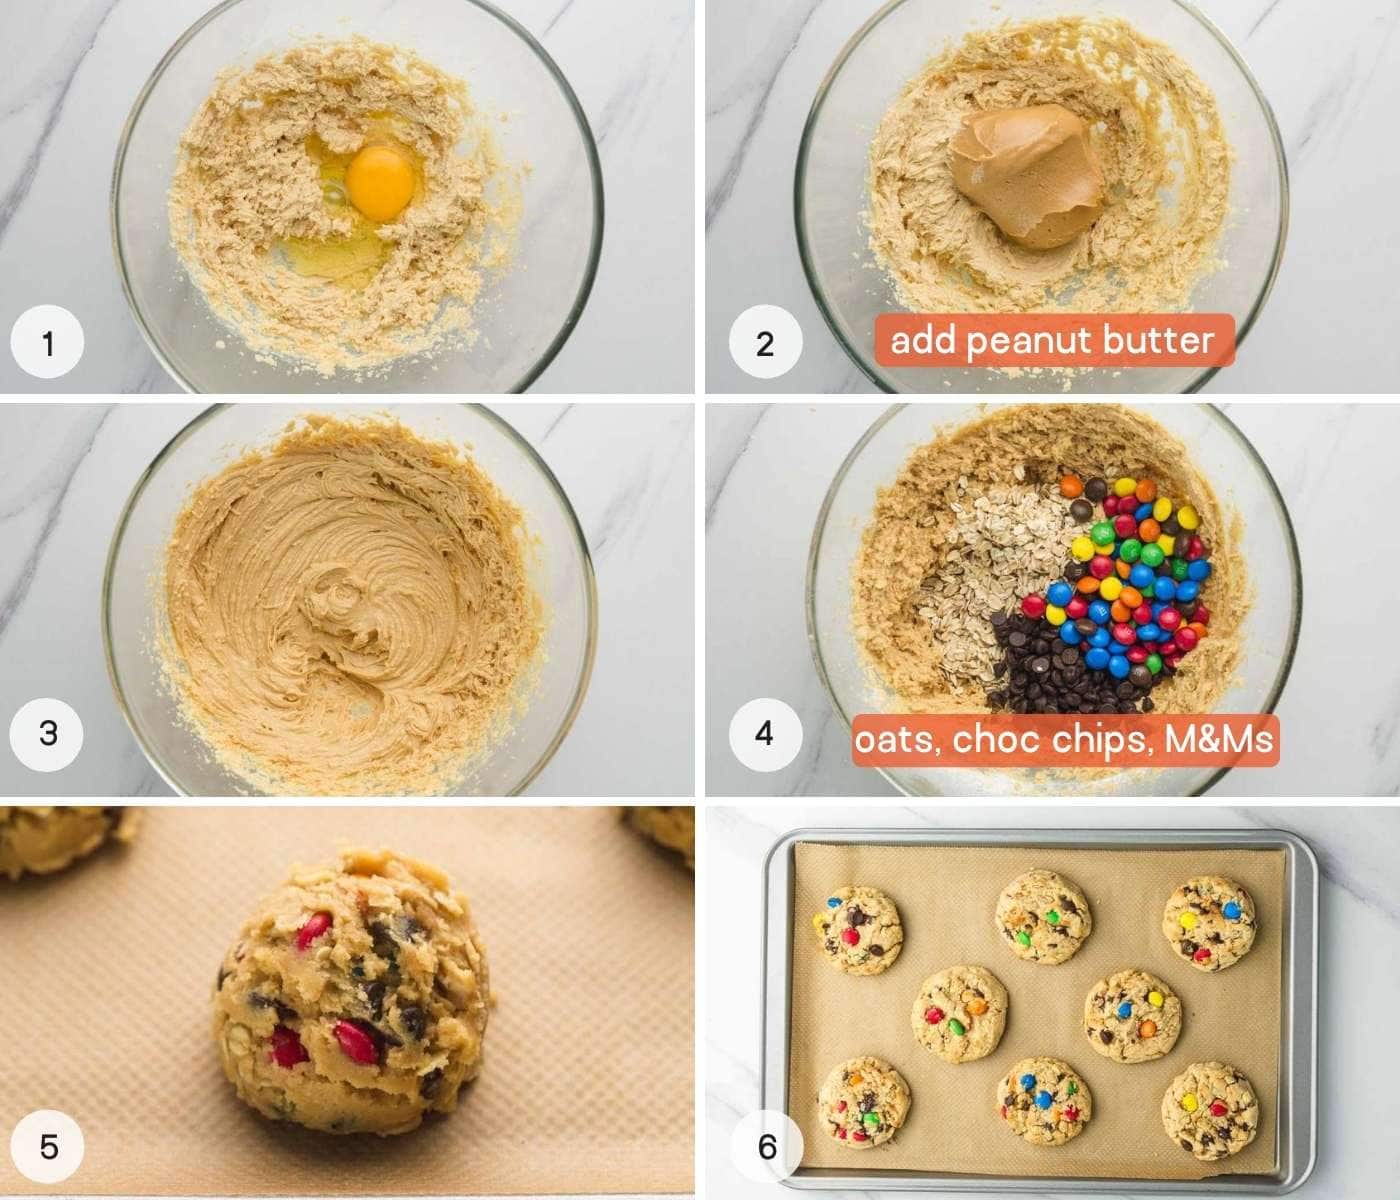 How to make monster cookies - step by step